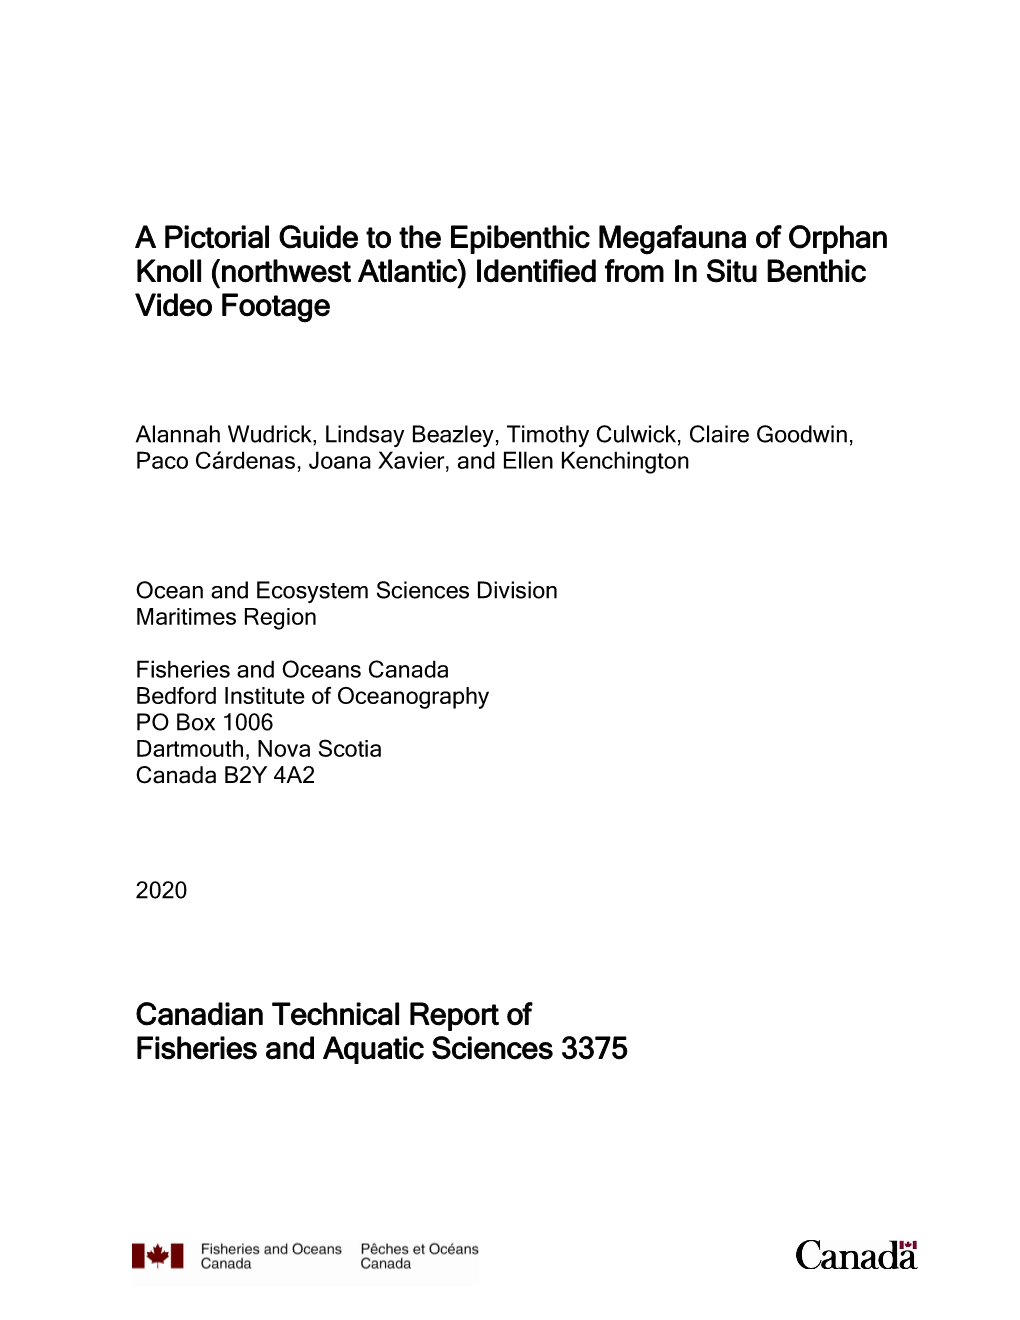 A Pictorial Guide to the Epibenthic Megafauna of Orphan Knoll (Northwest Atlantic) Identified from in Situ Benthic Video Footage